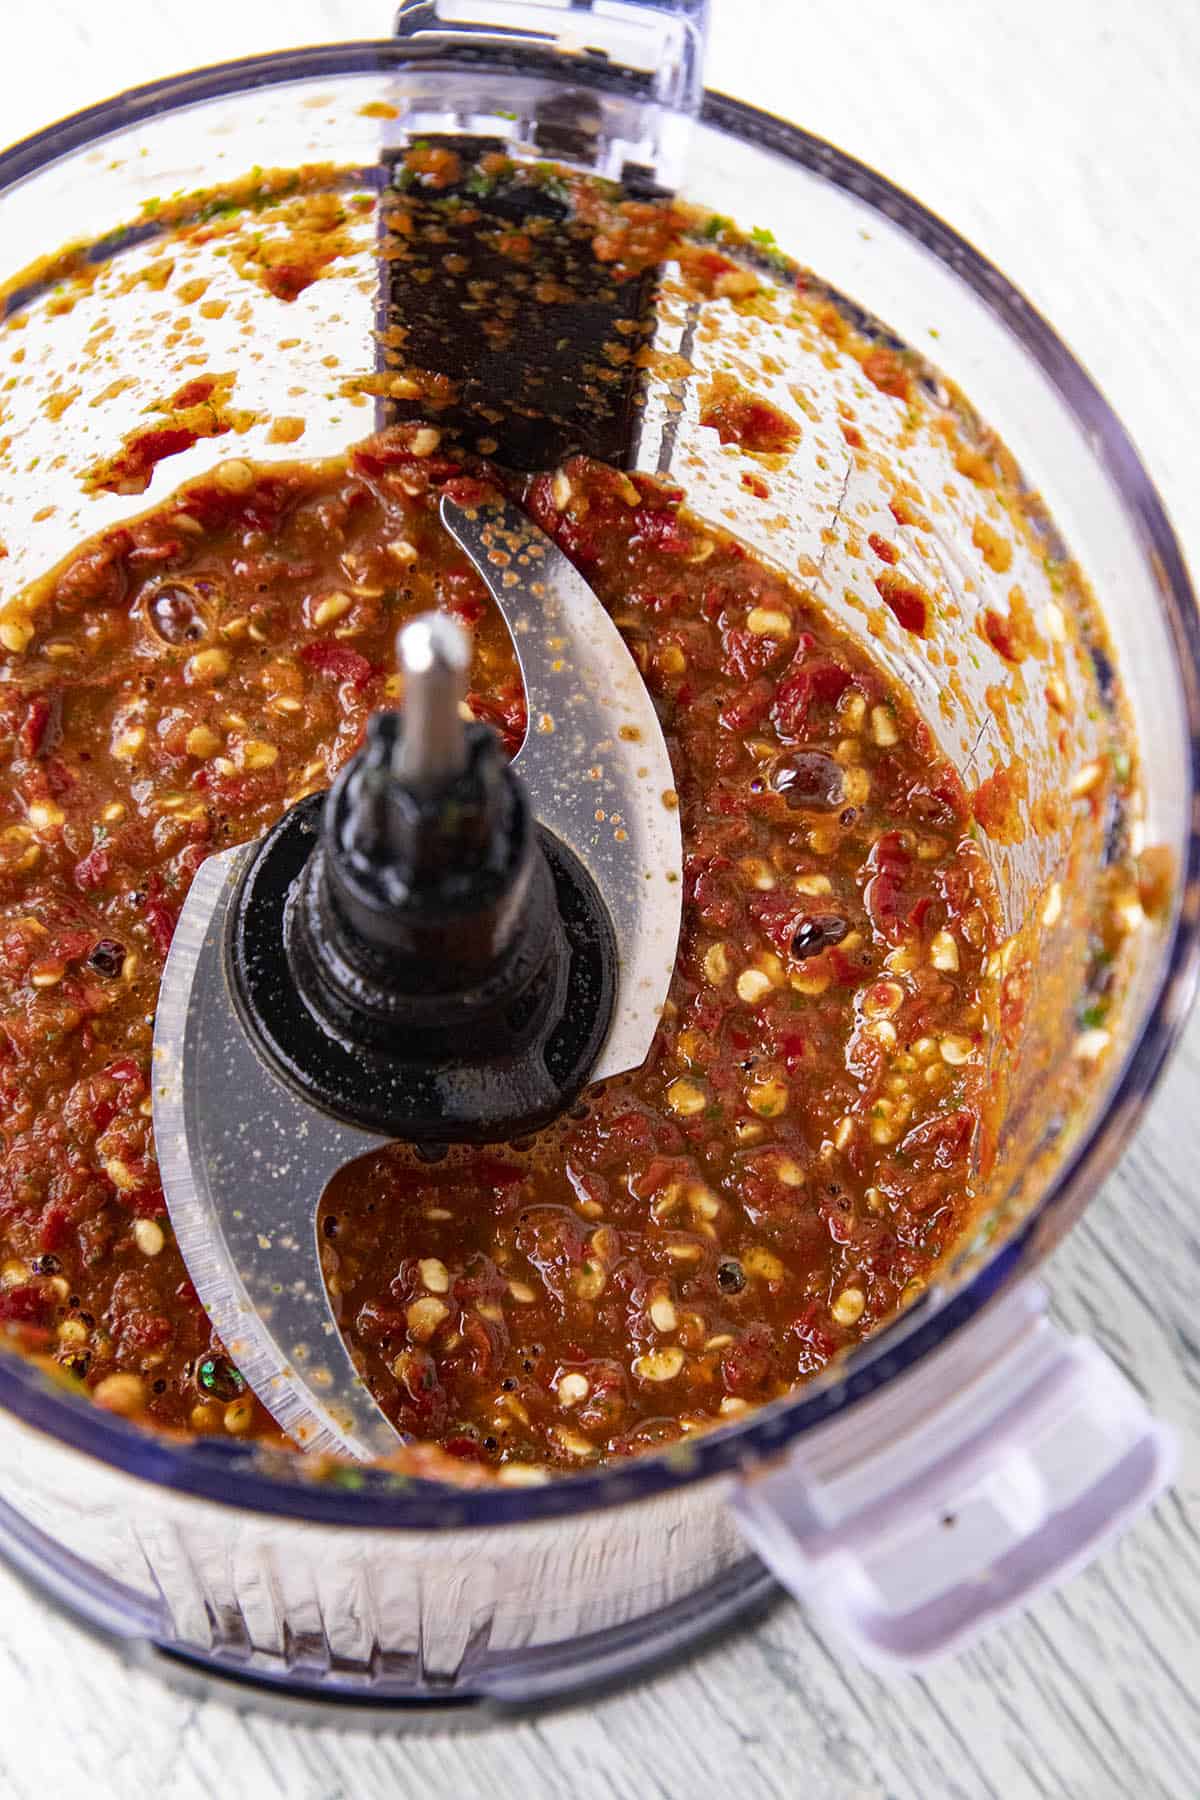 Fresh Chile de Arbol Salsa in a food processor, made with fresh peppers from my garden